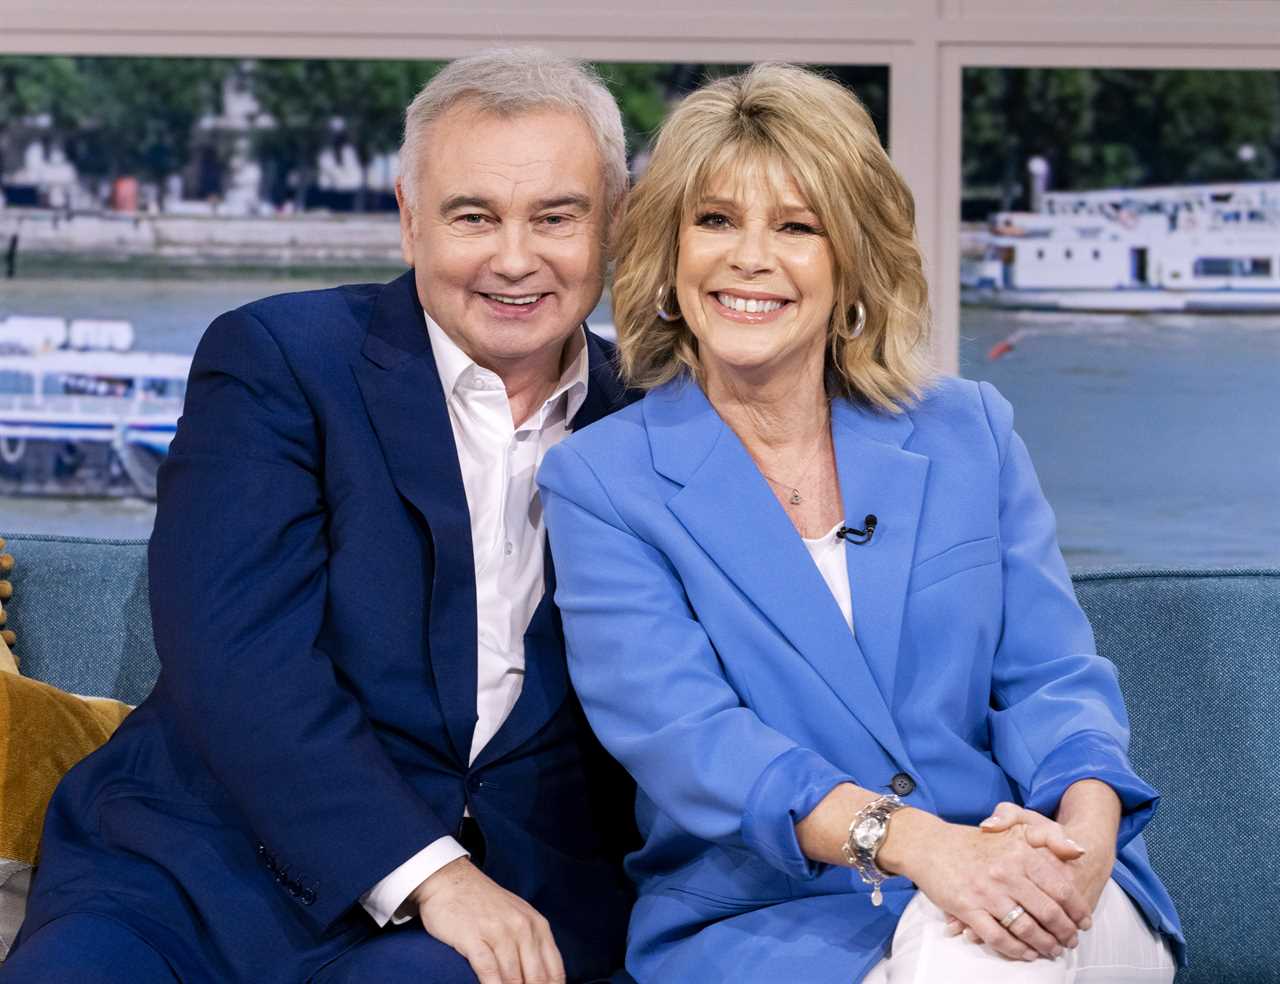 Eamonn Holmes slams Phillip Schofield saying ‘he’s lied to everyone’ and ‘more will come out’